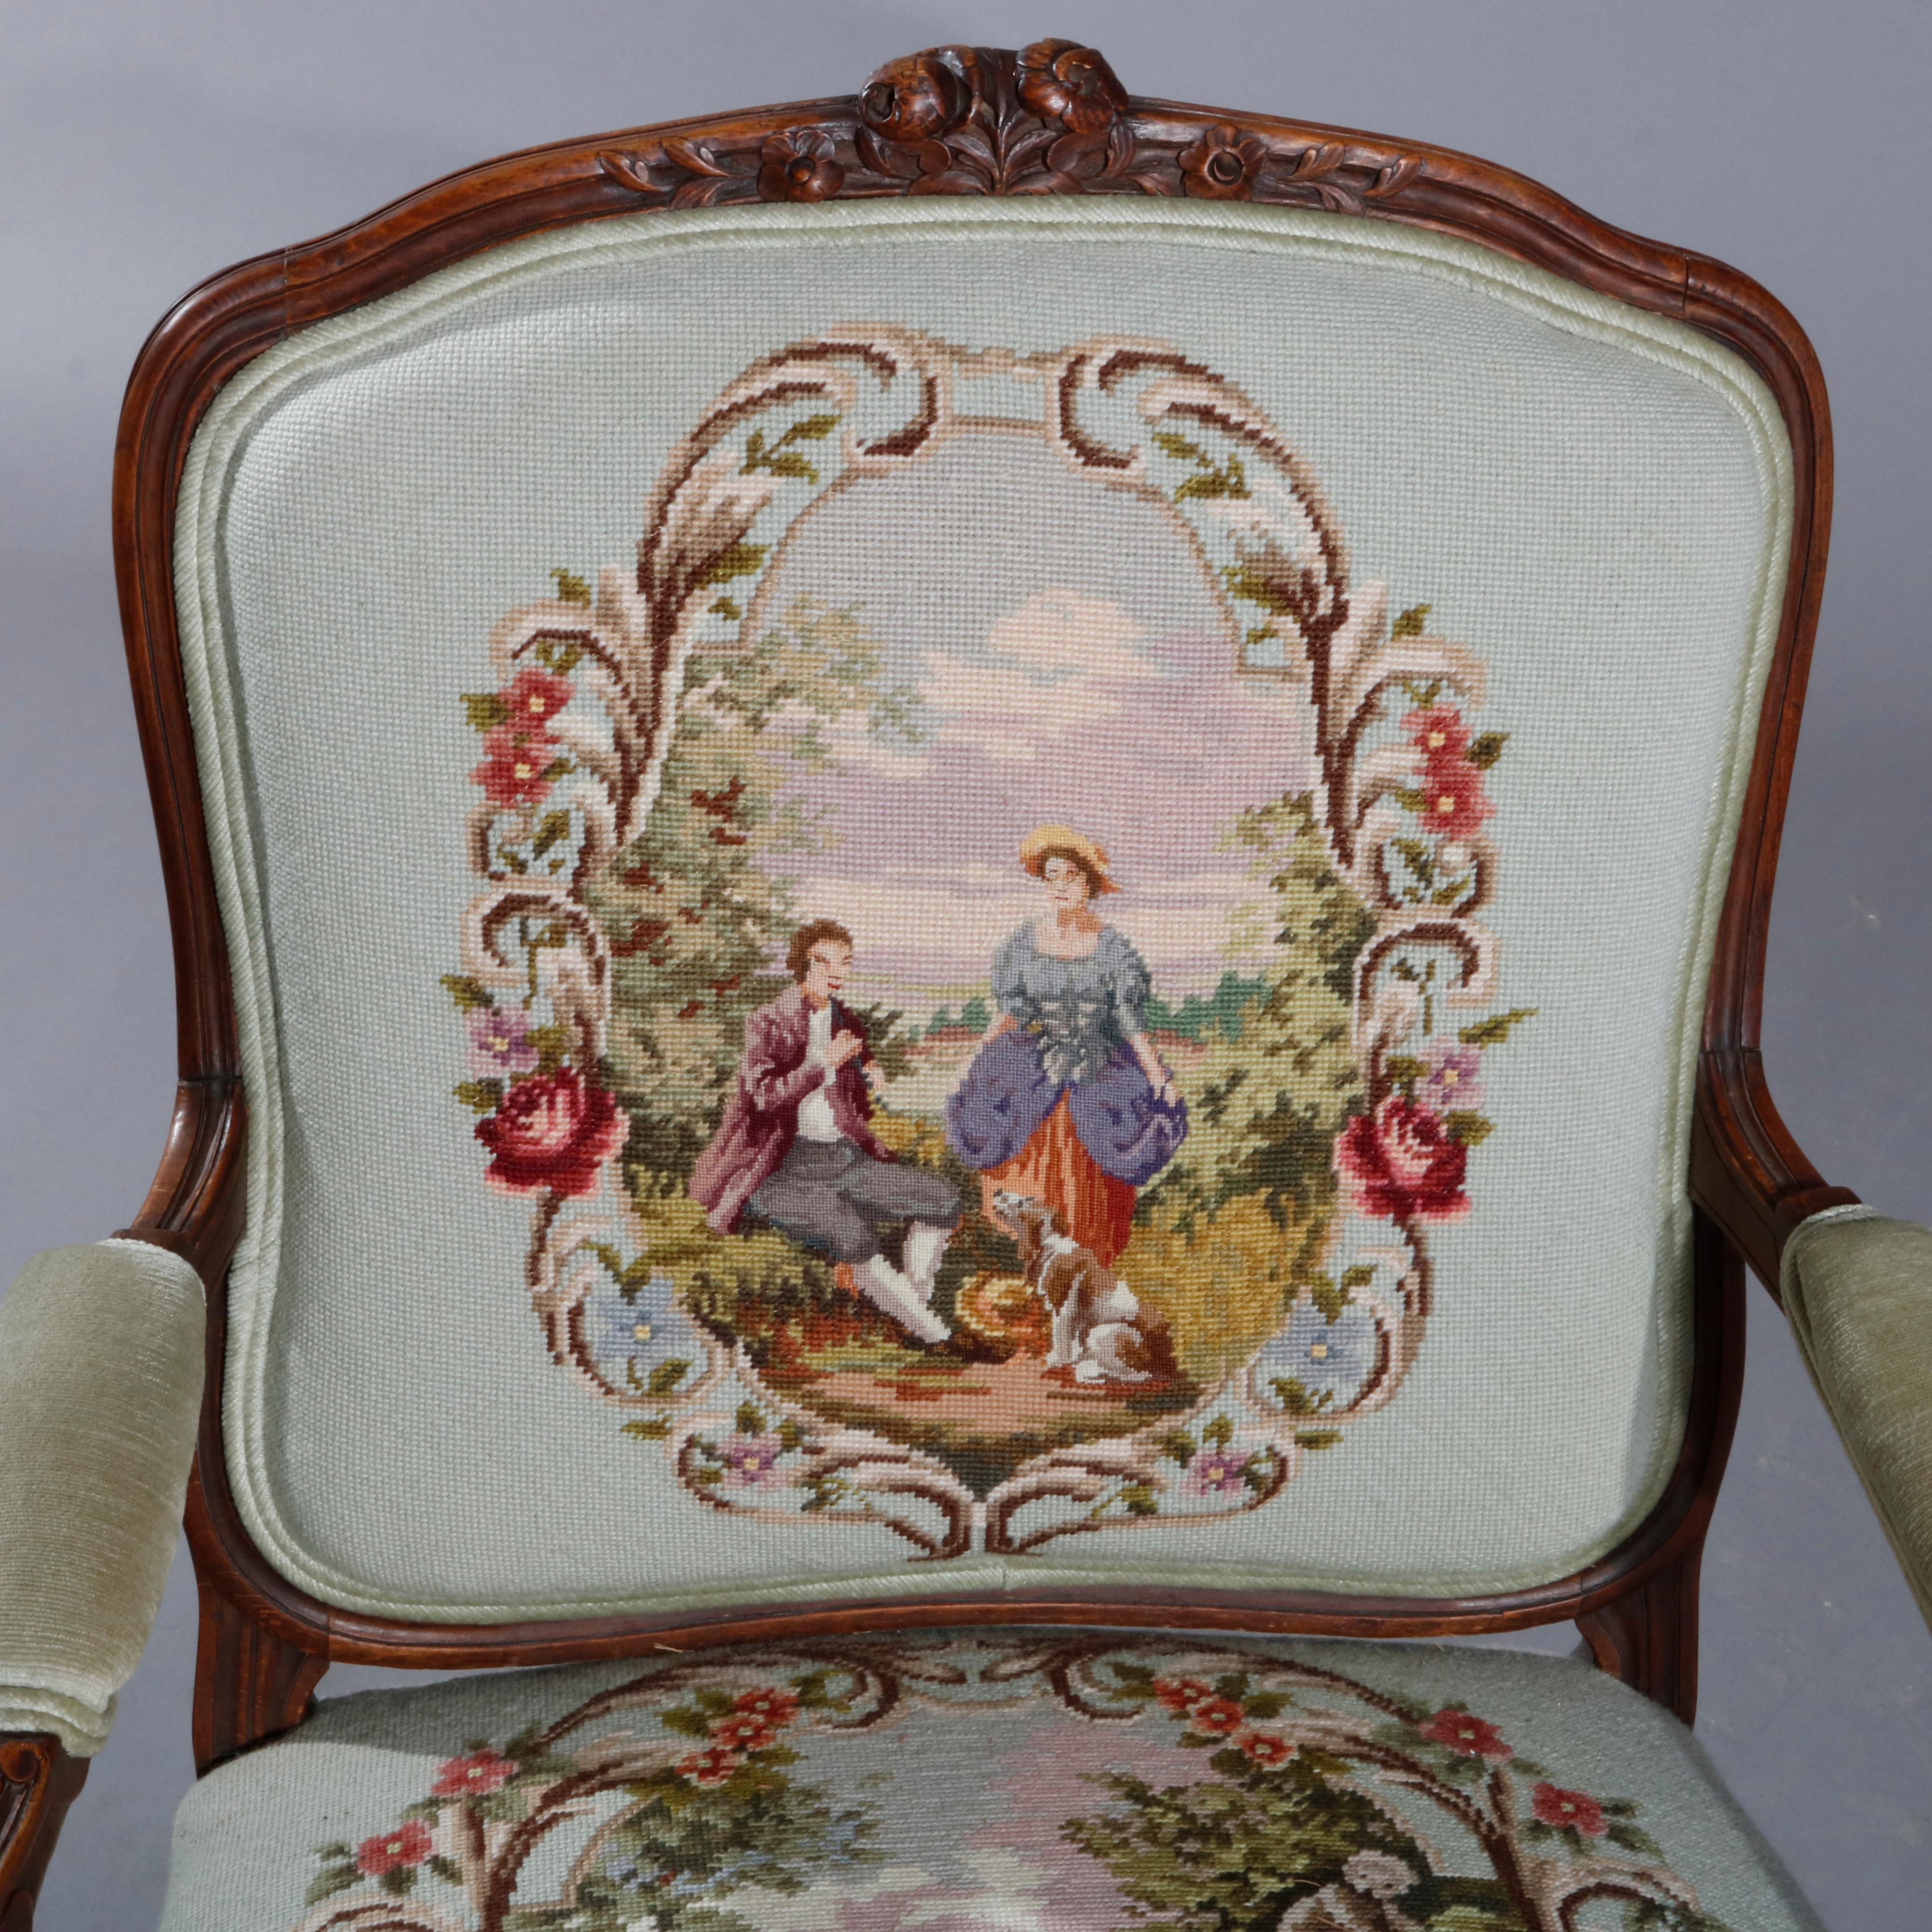 An antique French Louis XVI armchair offers carved fruitwood frame raised on cabriole legs terminating in scroll form feet with needlepoint tapestry back and seat courting and landscape scenes, circa 1920

Measures: 39